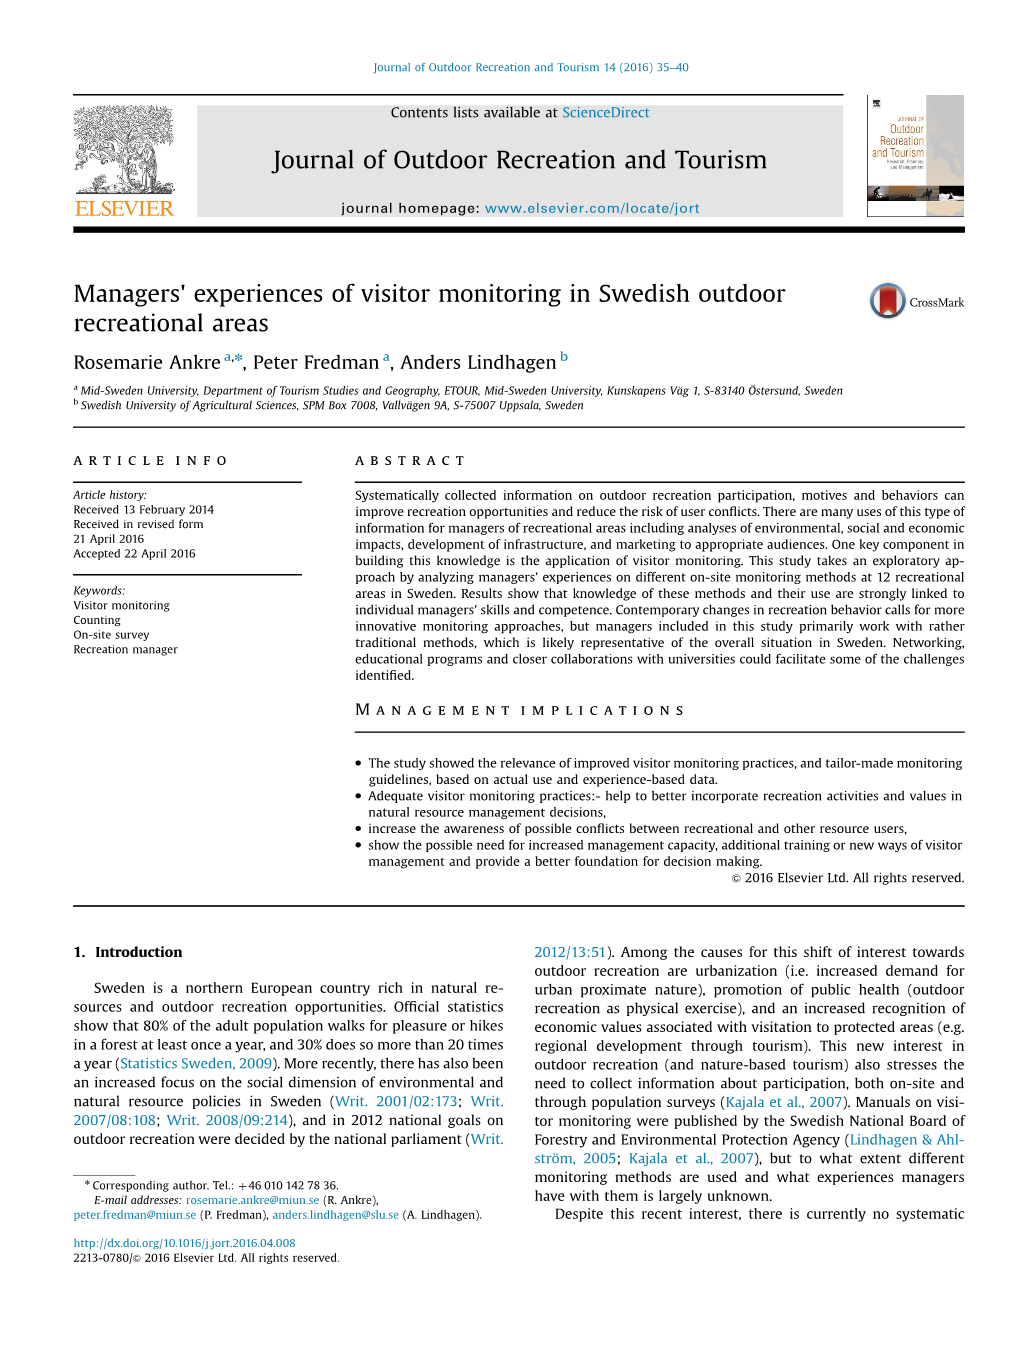 Managers' Experiences of Visitor Monitoring in Swedish Outdoor Recreational Areas